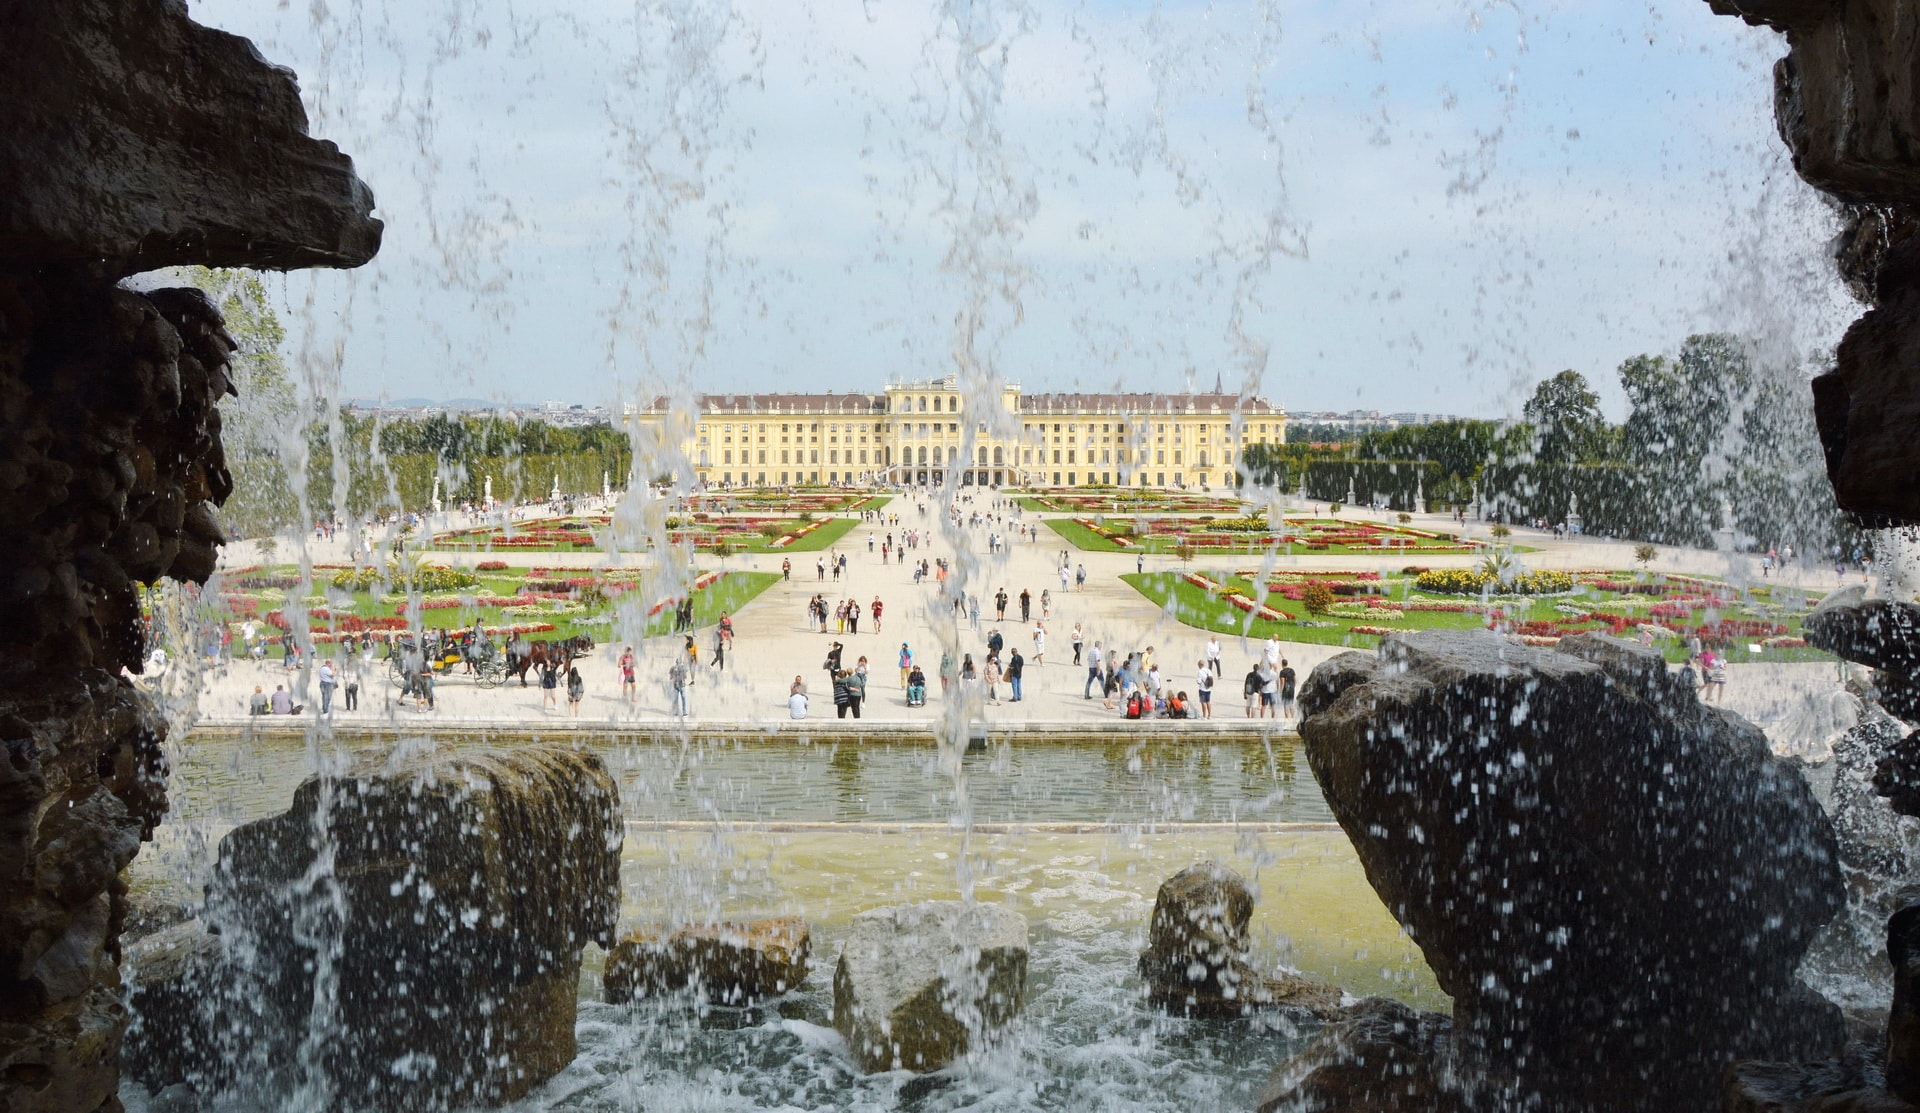 View of the Schönbrunn Palace from behind the Neptune Fountain in the gardens